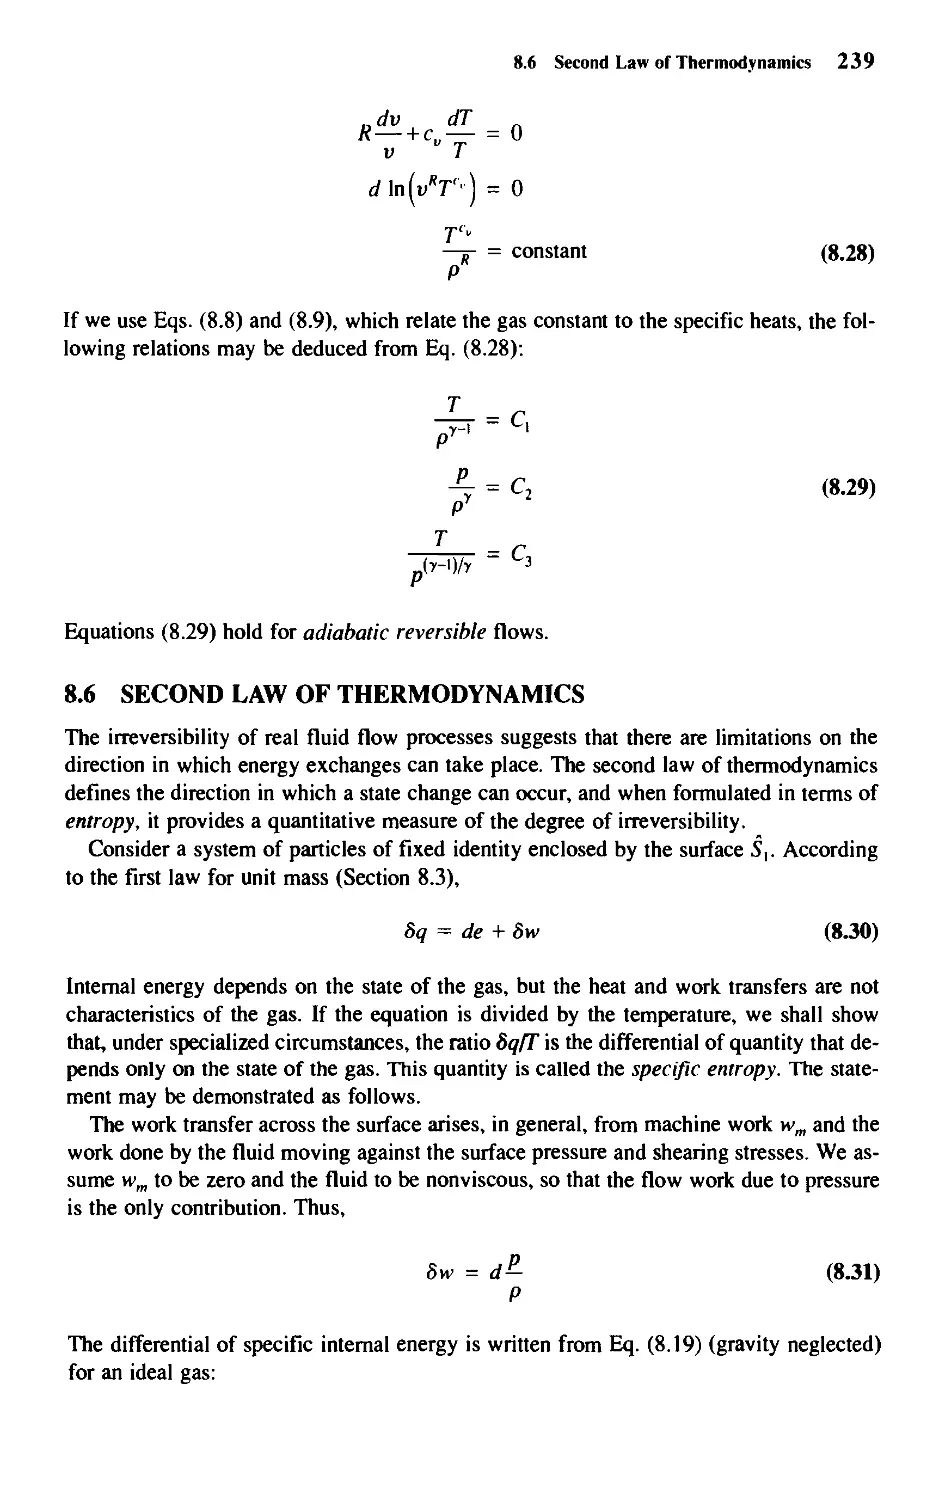 8.6 - Second Law of Thermodynamics